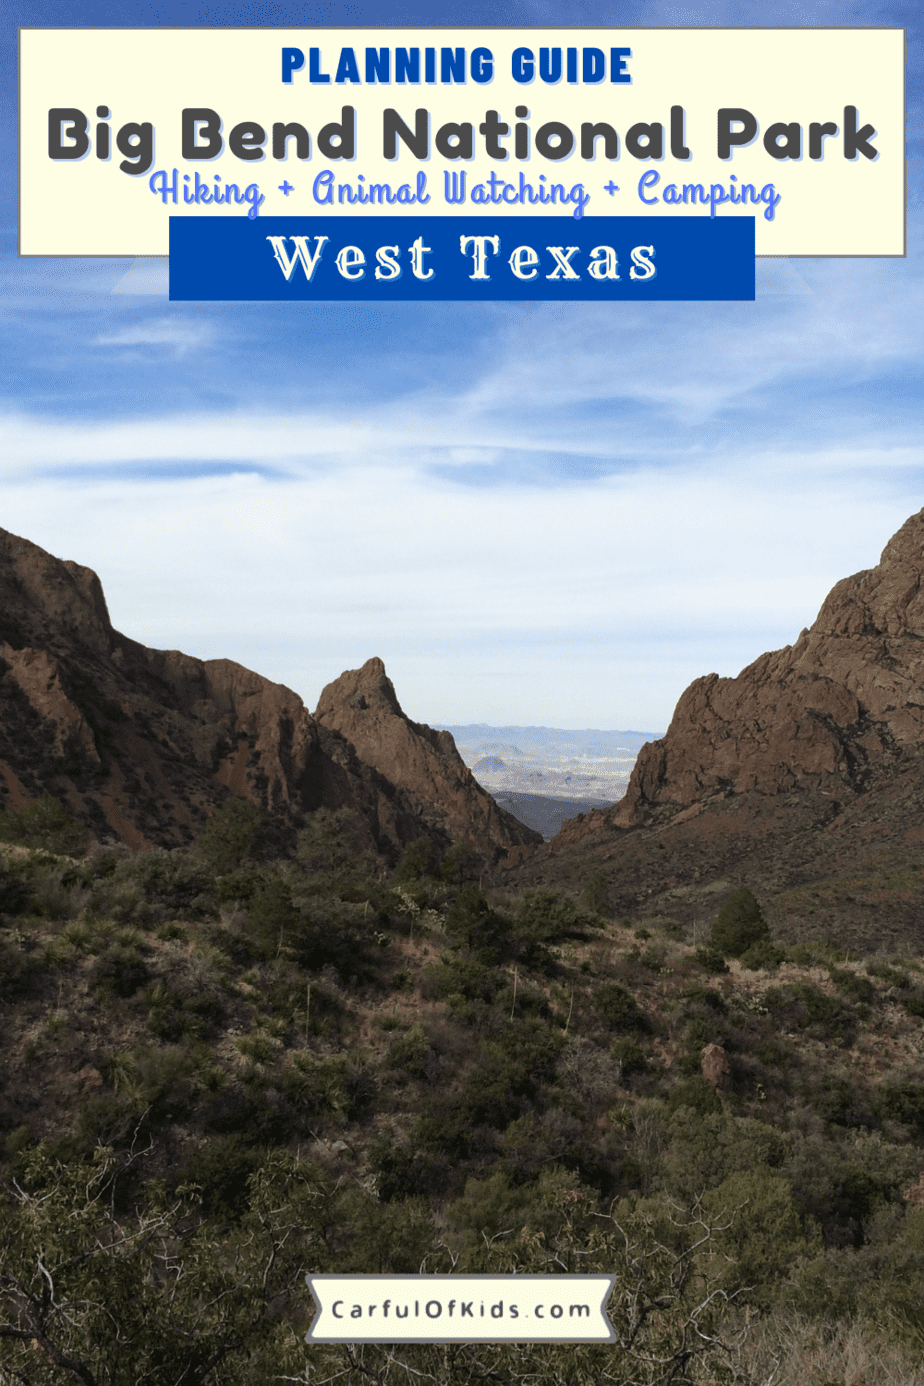 Located at the end of the road at the Bend in West Texas, Big Bend National Park protects the desert and the Chisos Mountains along the shores of the Rio Grande. Visitors will enjoy a rugged landscape during the day and amazing night skies during the day. Here are the top things to do in Big Bend along with the top places to see in a visit. How long to stay in Big Bend | Where to camp in Big Bend #BigBend #NationalParks 